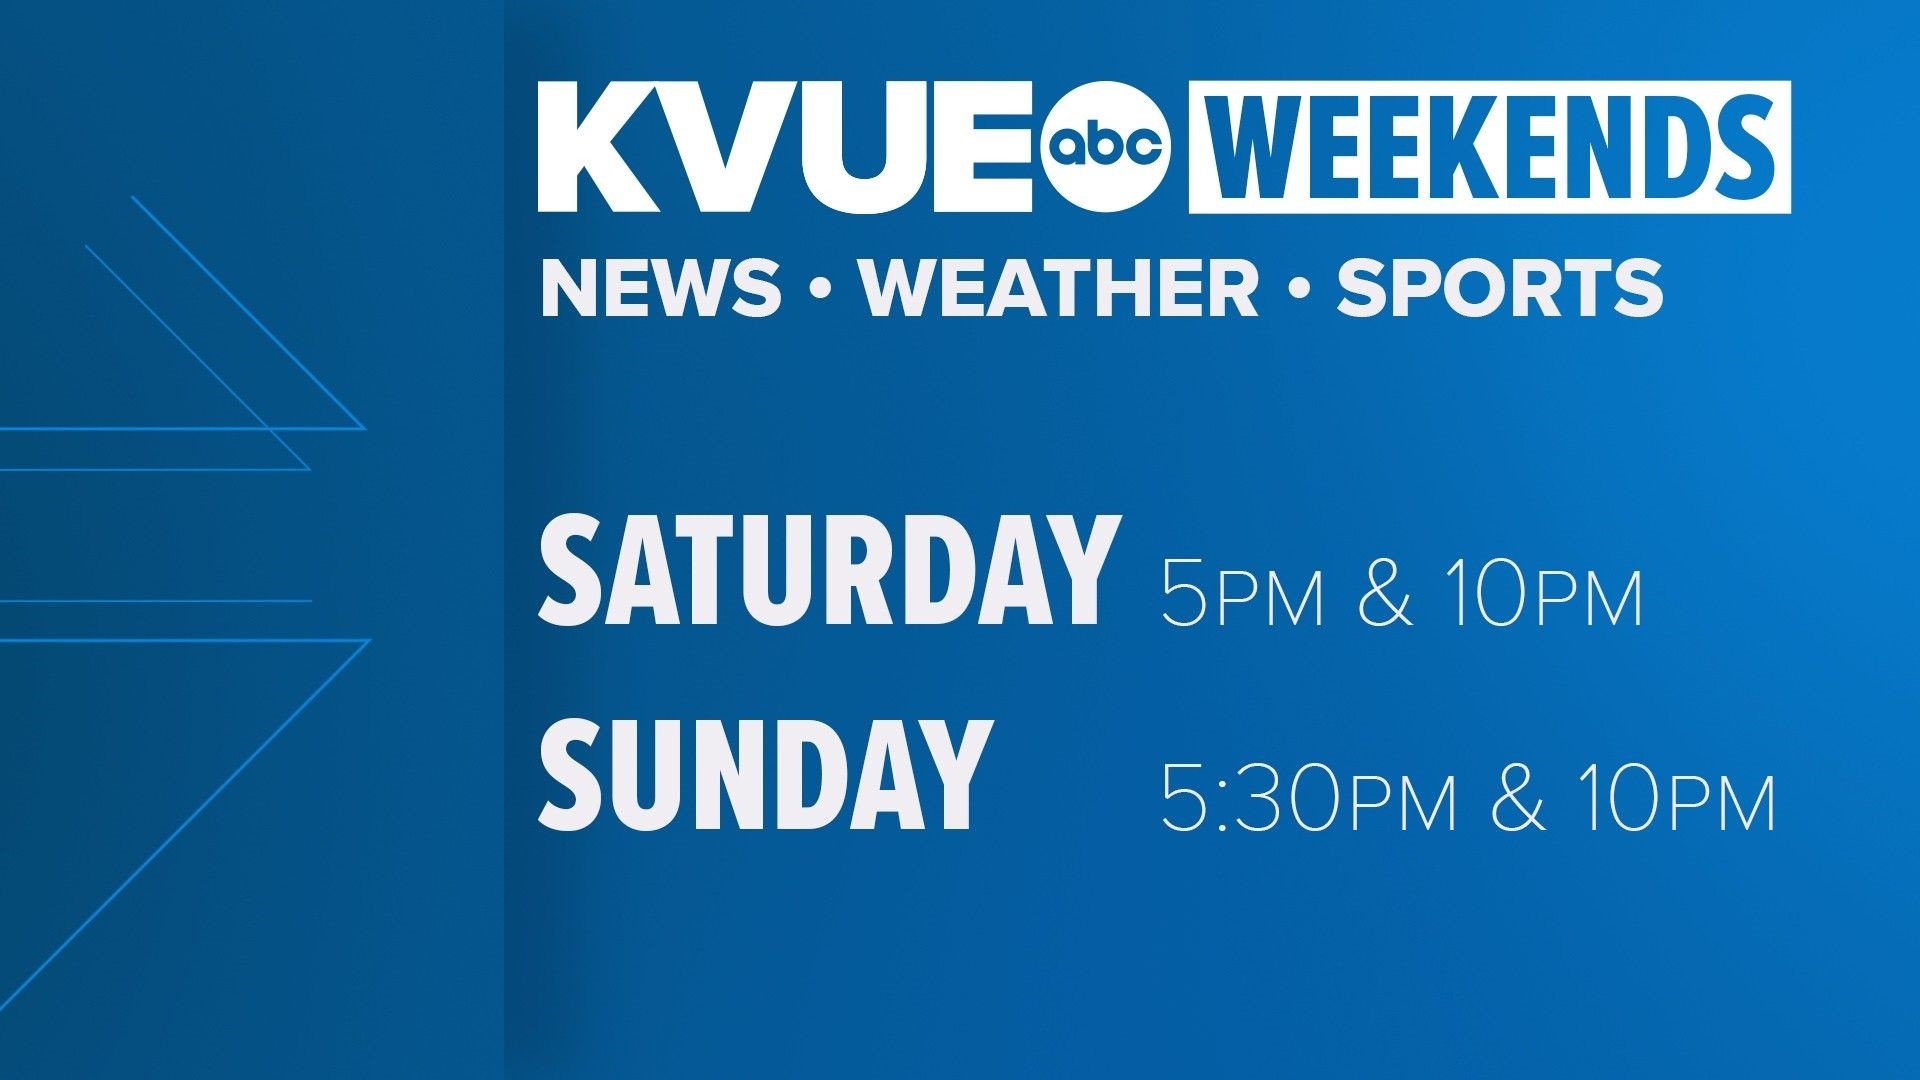 The KVUE News team provides a look at local, regional, statewide and national news events and the latest information on weather issues.